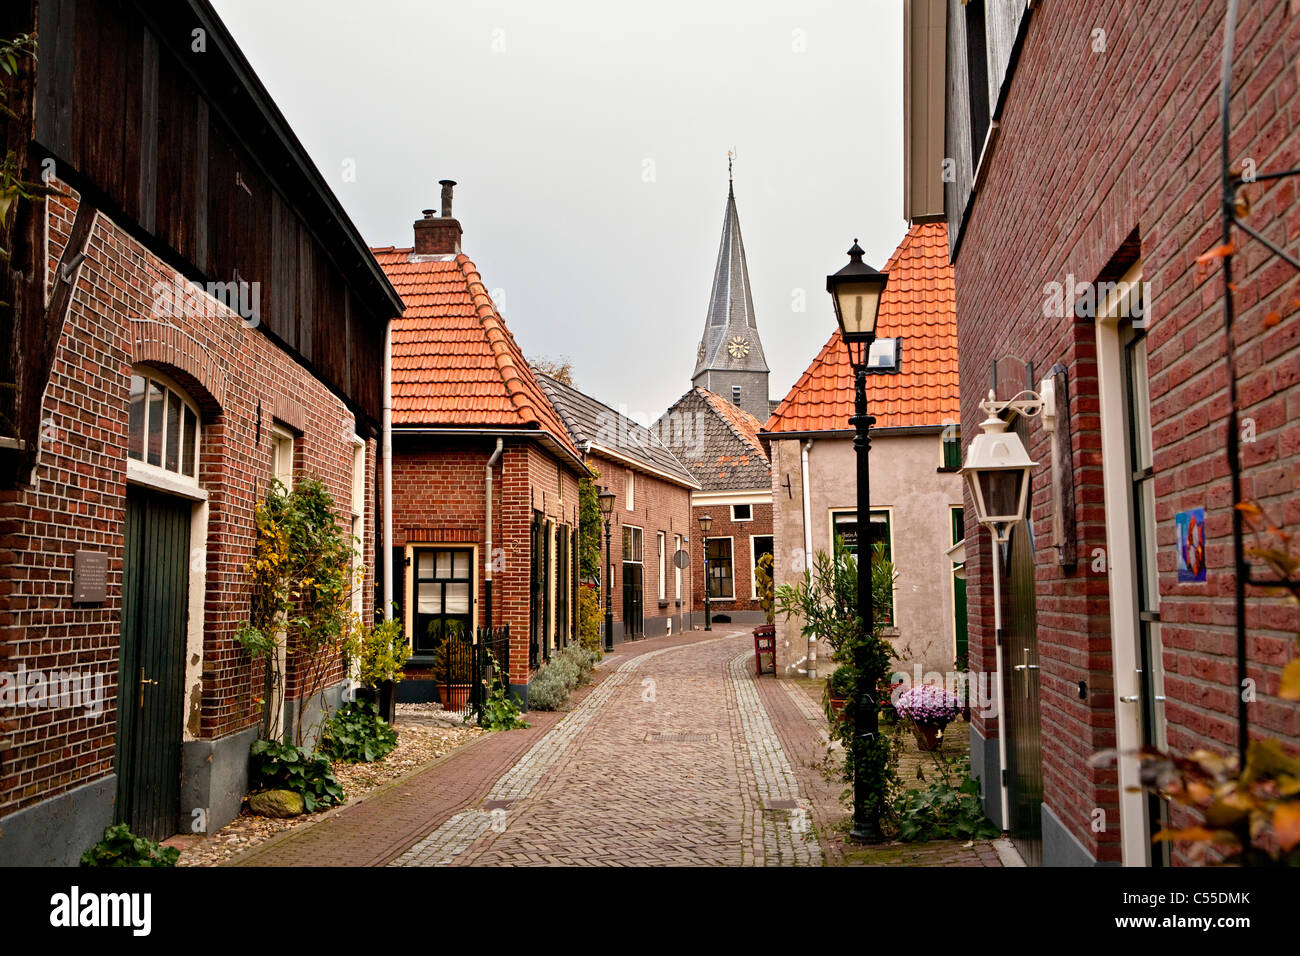 The Netherlands, Bredevoort, Centre of historical village. Stock Photo